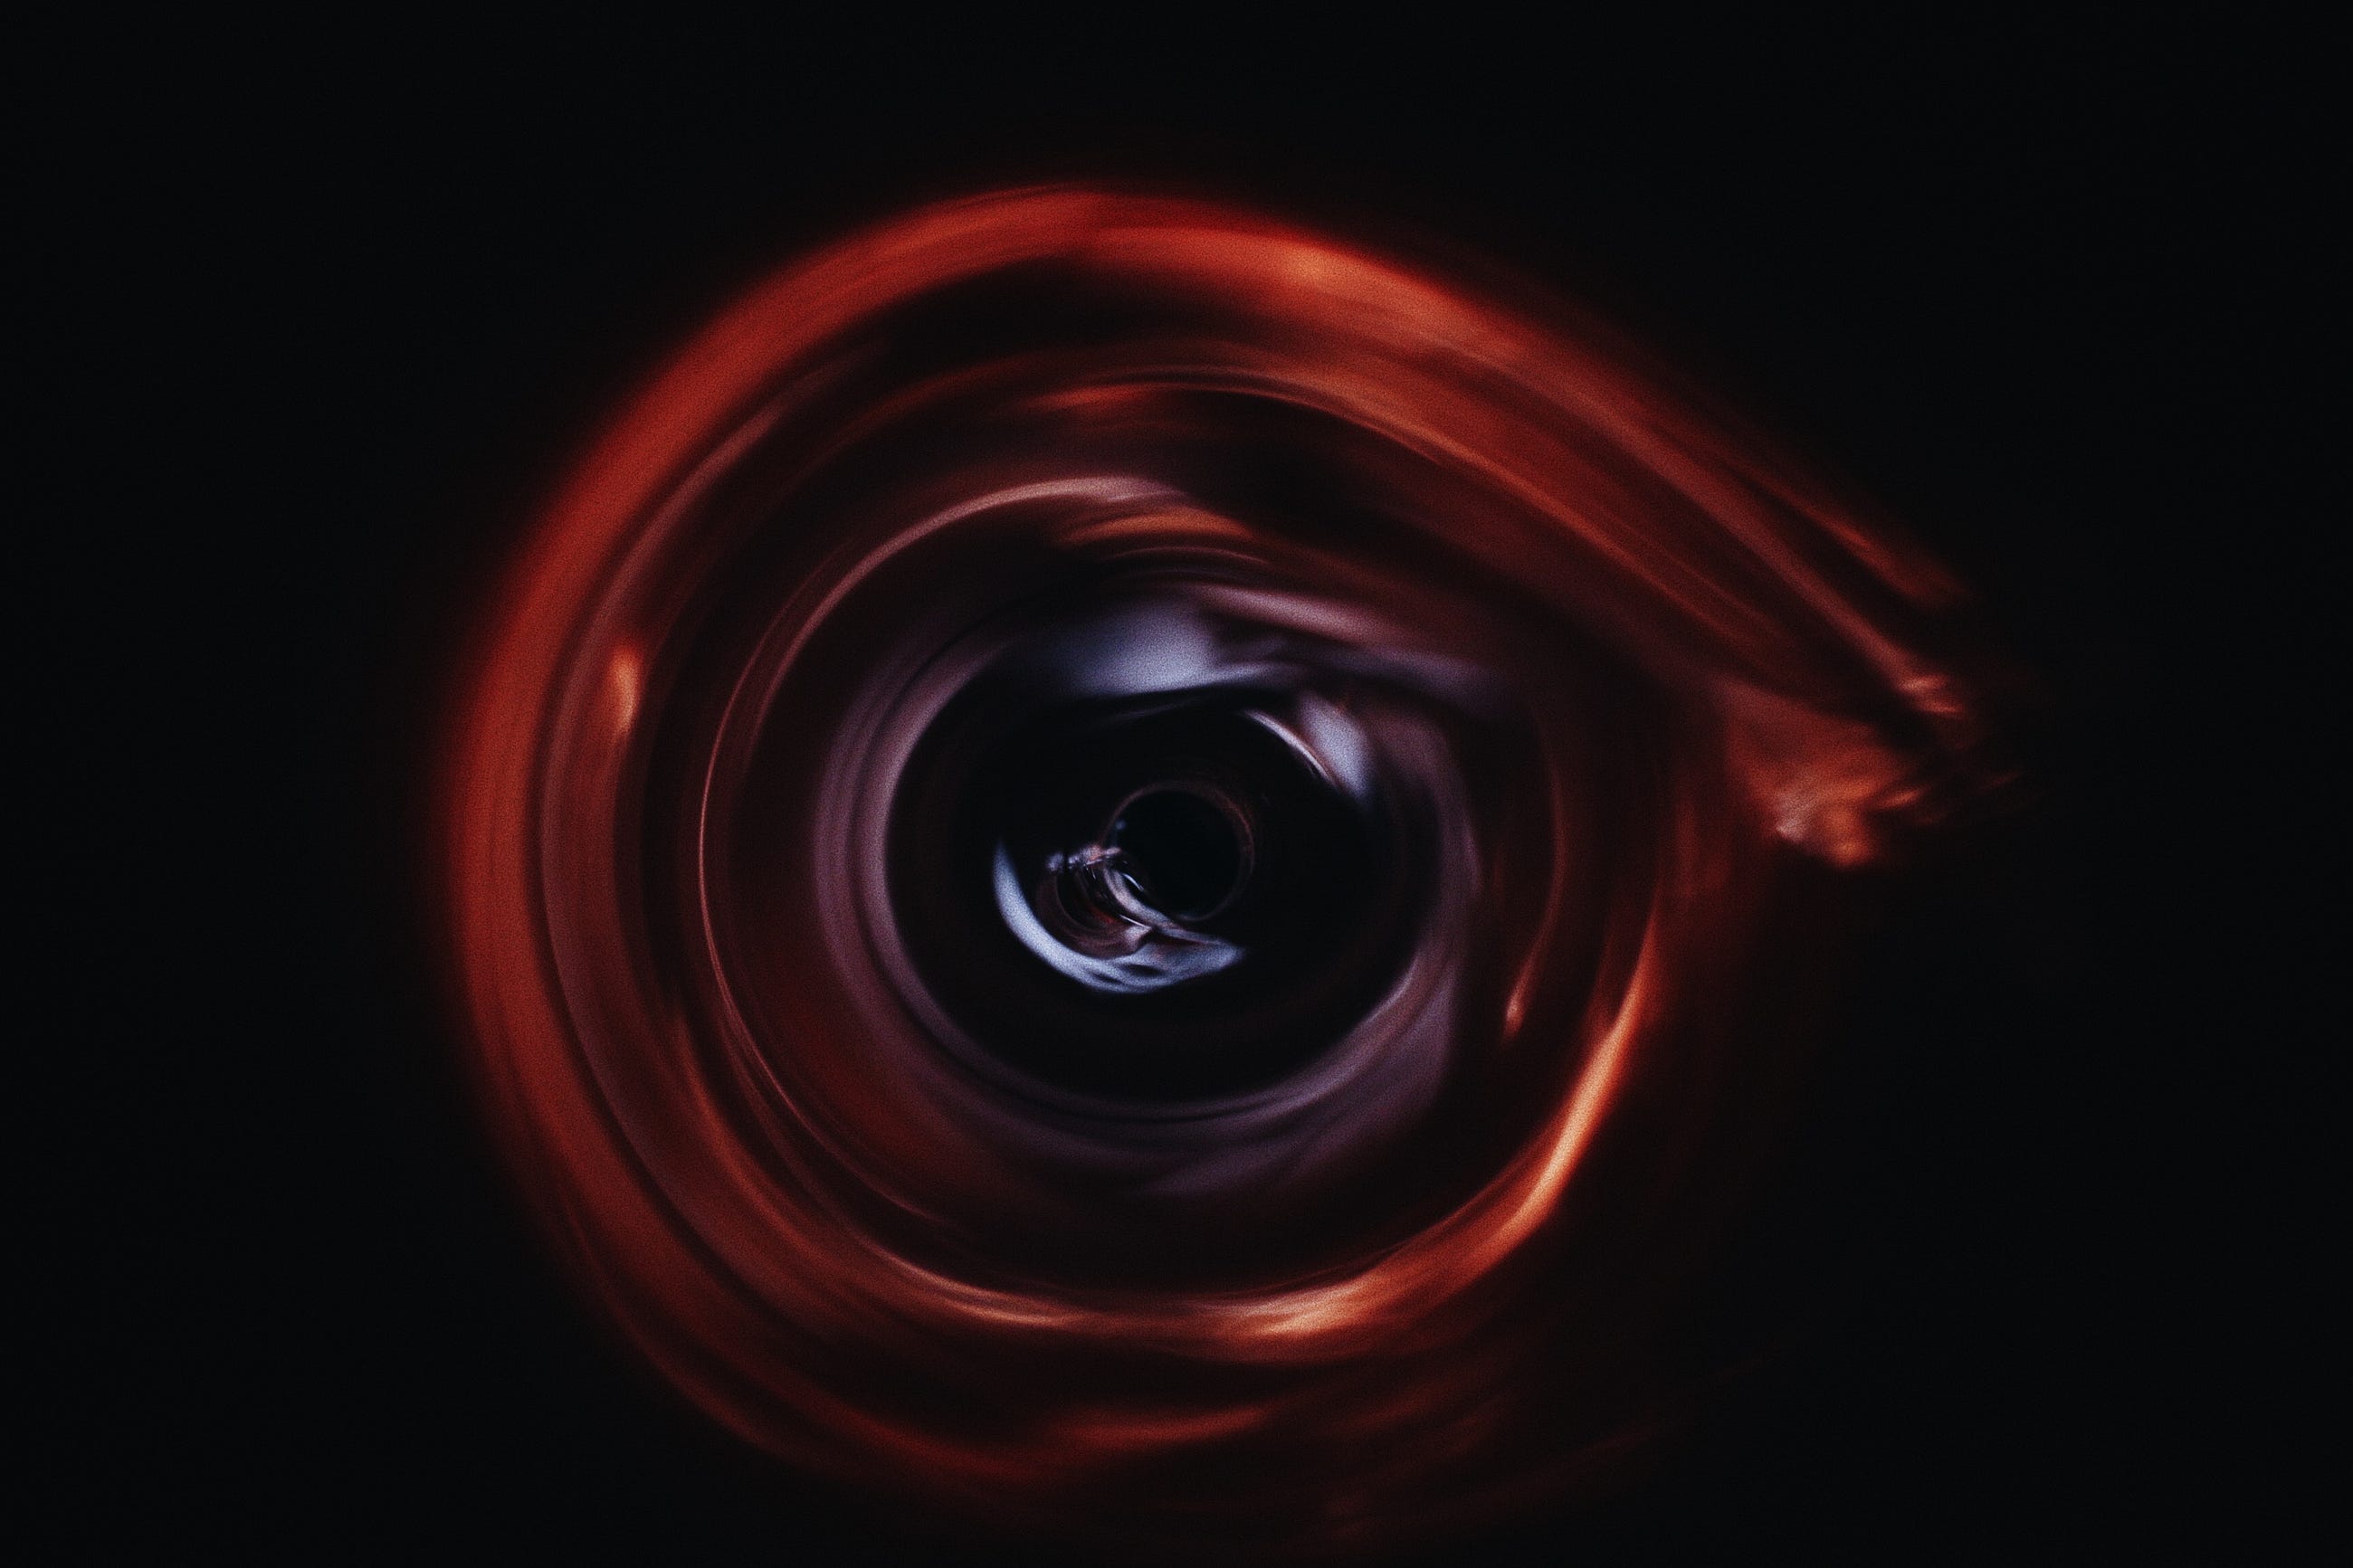 What if you fell into a Black Hole-